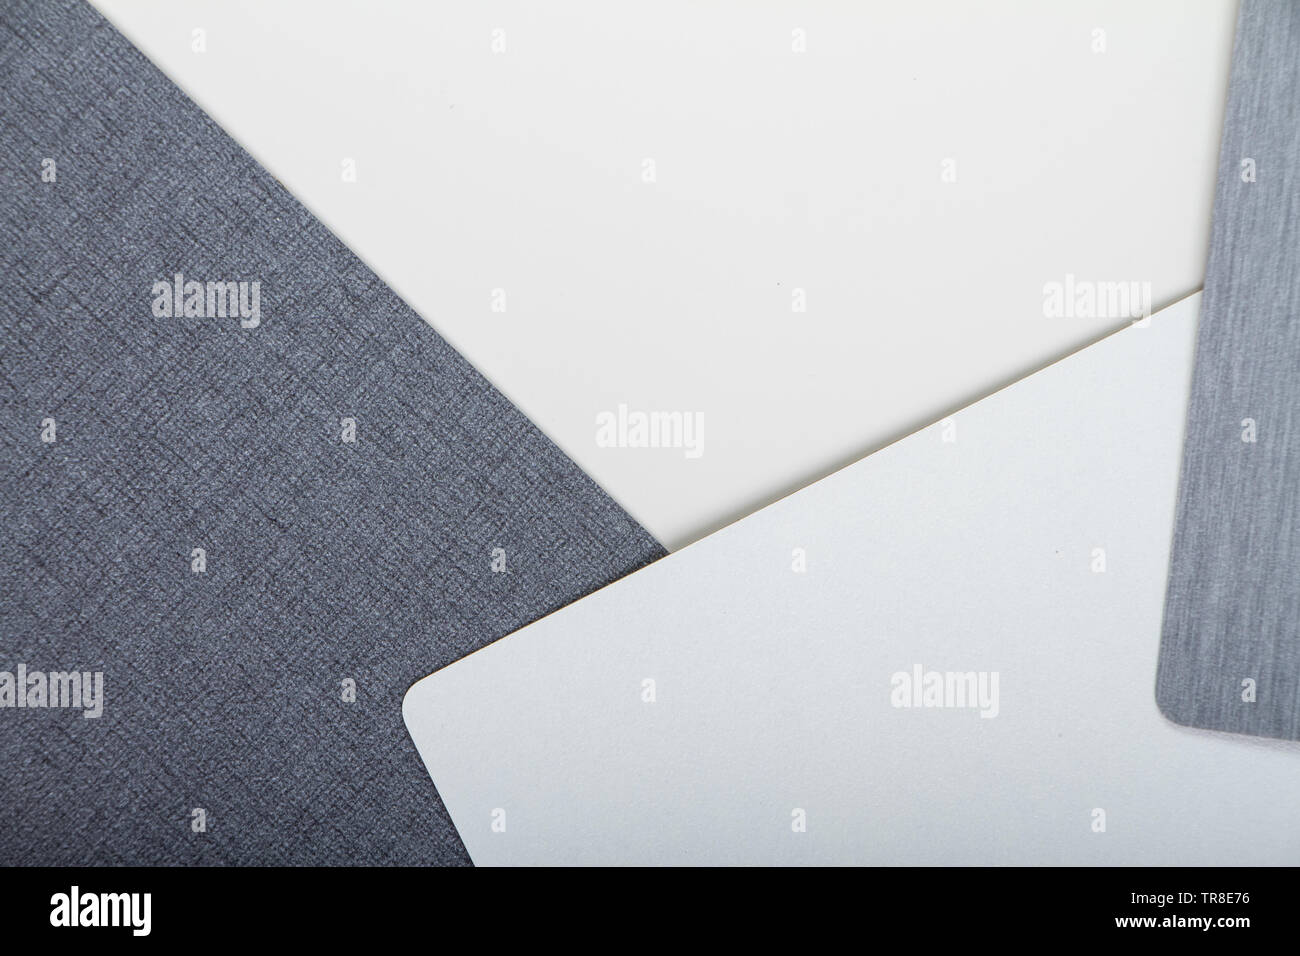 Two-tone white and gray textural colored background, minimalistic concept or background. Stock Photo